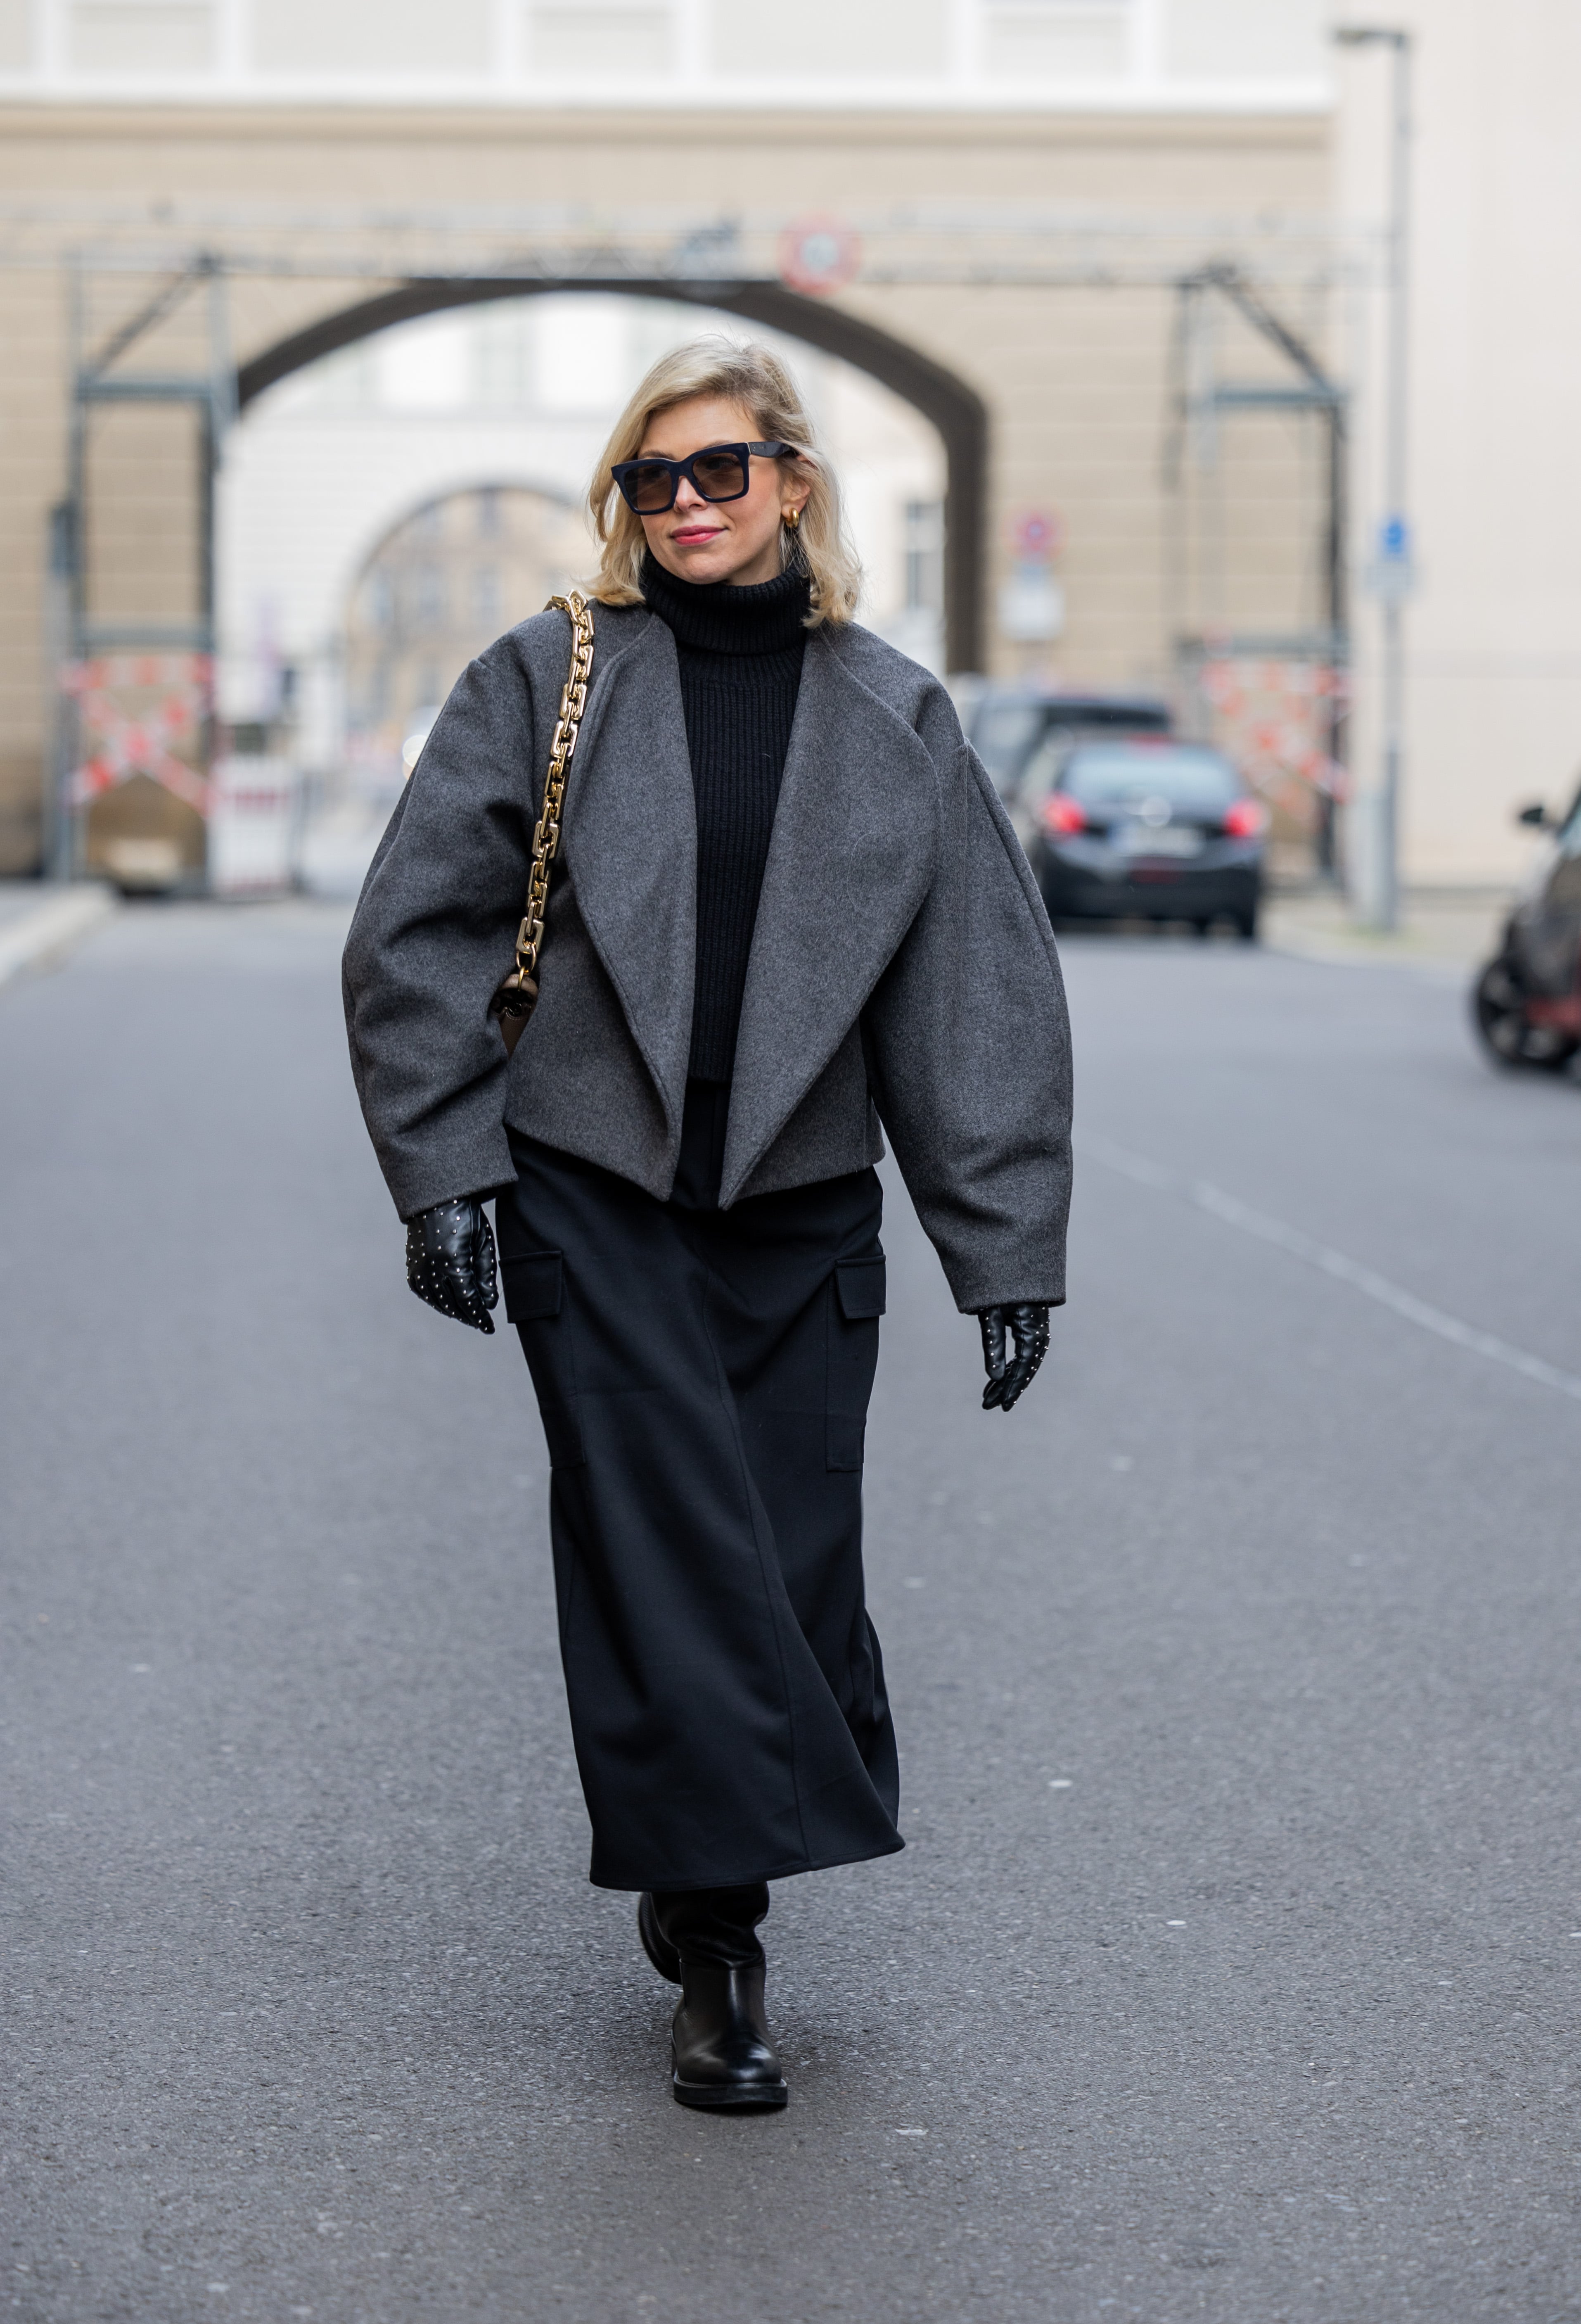 Winter Outfit Idea: Skirt with Thermal Tights